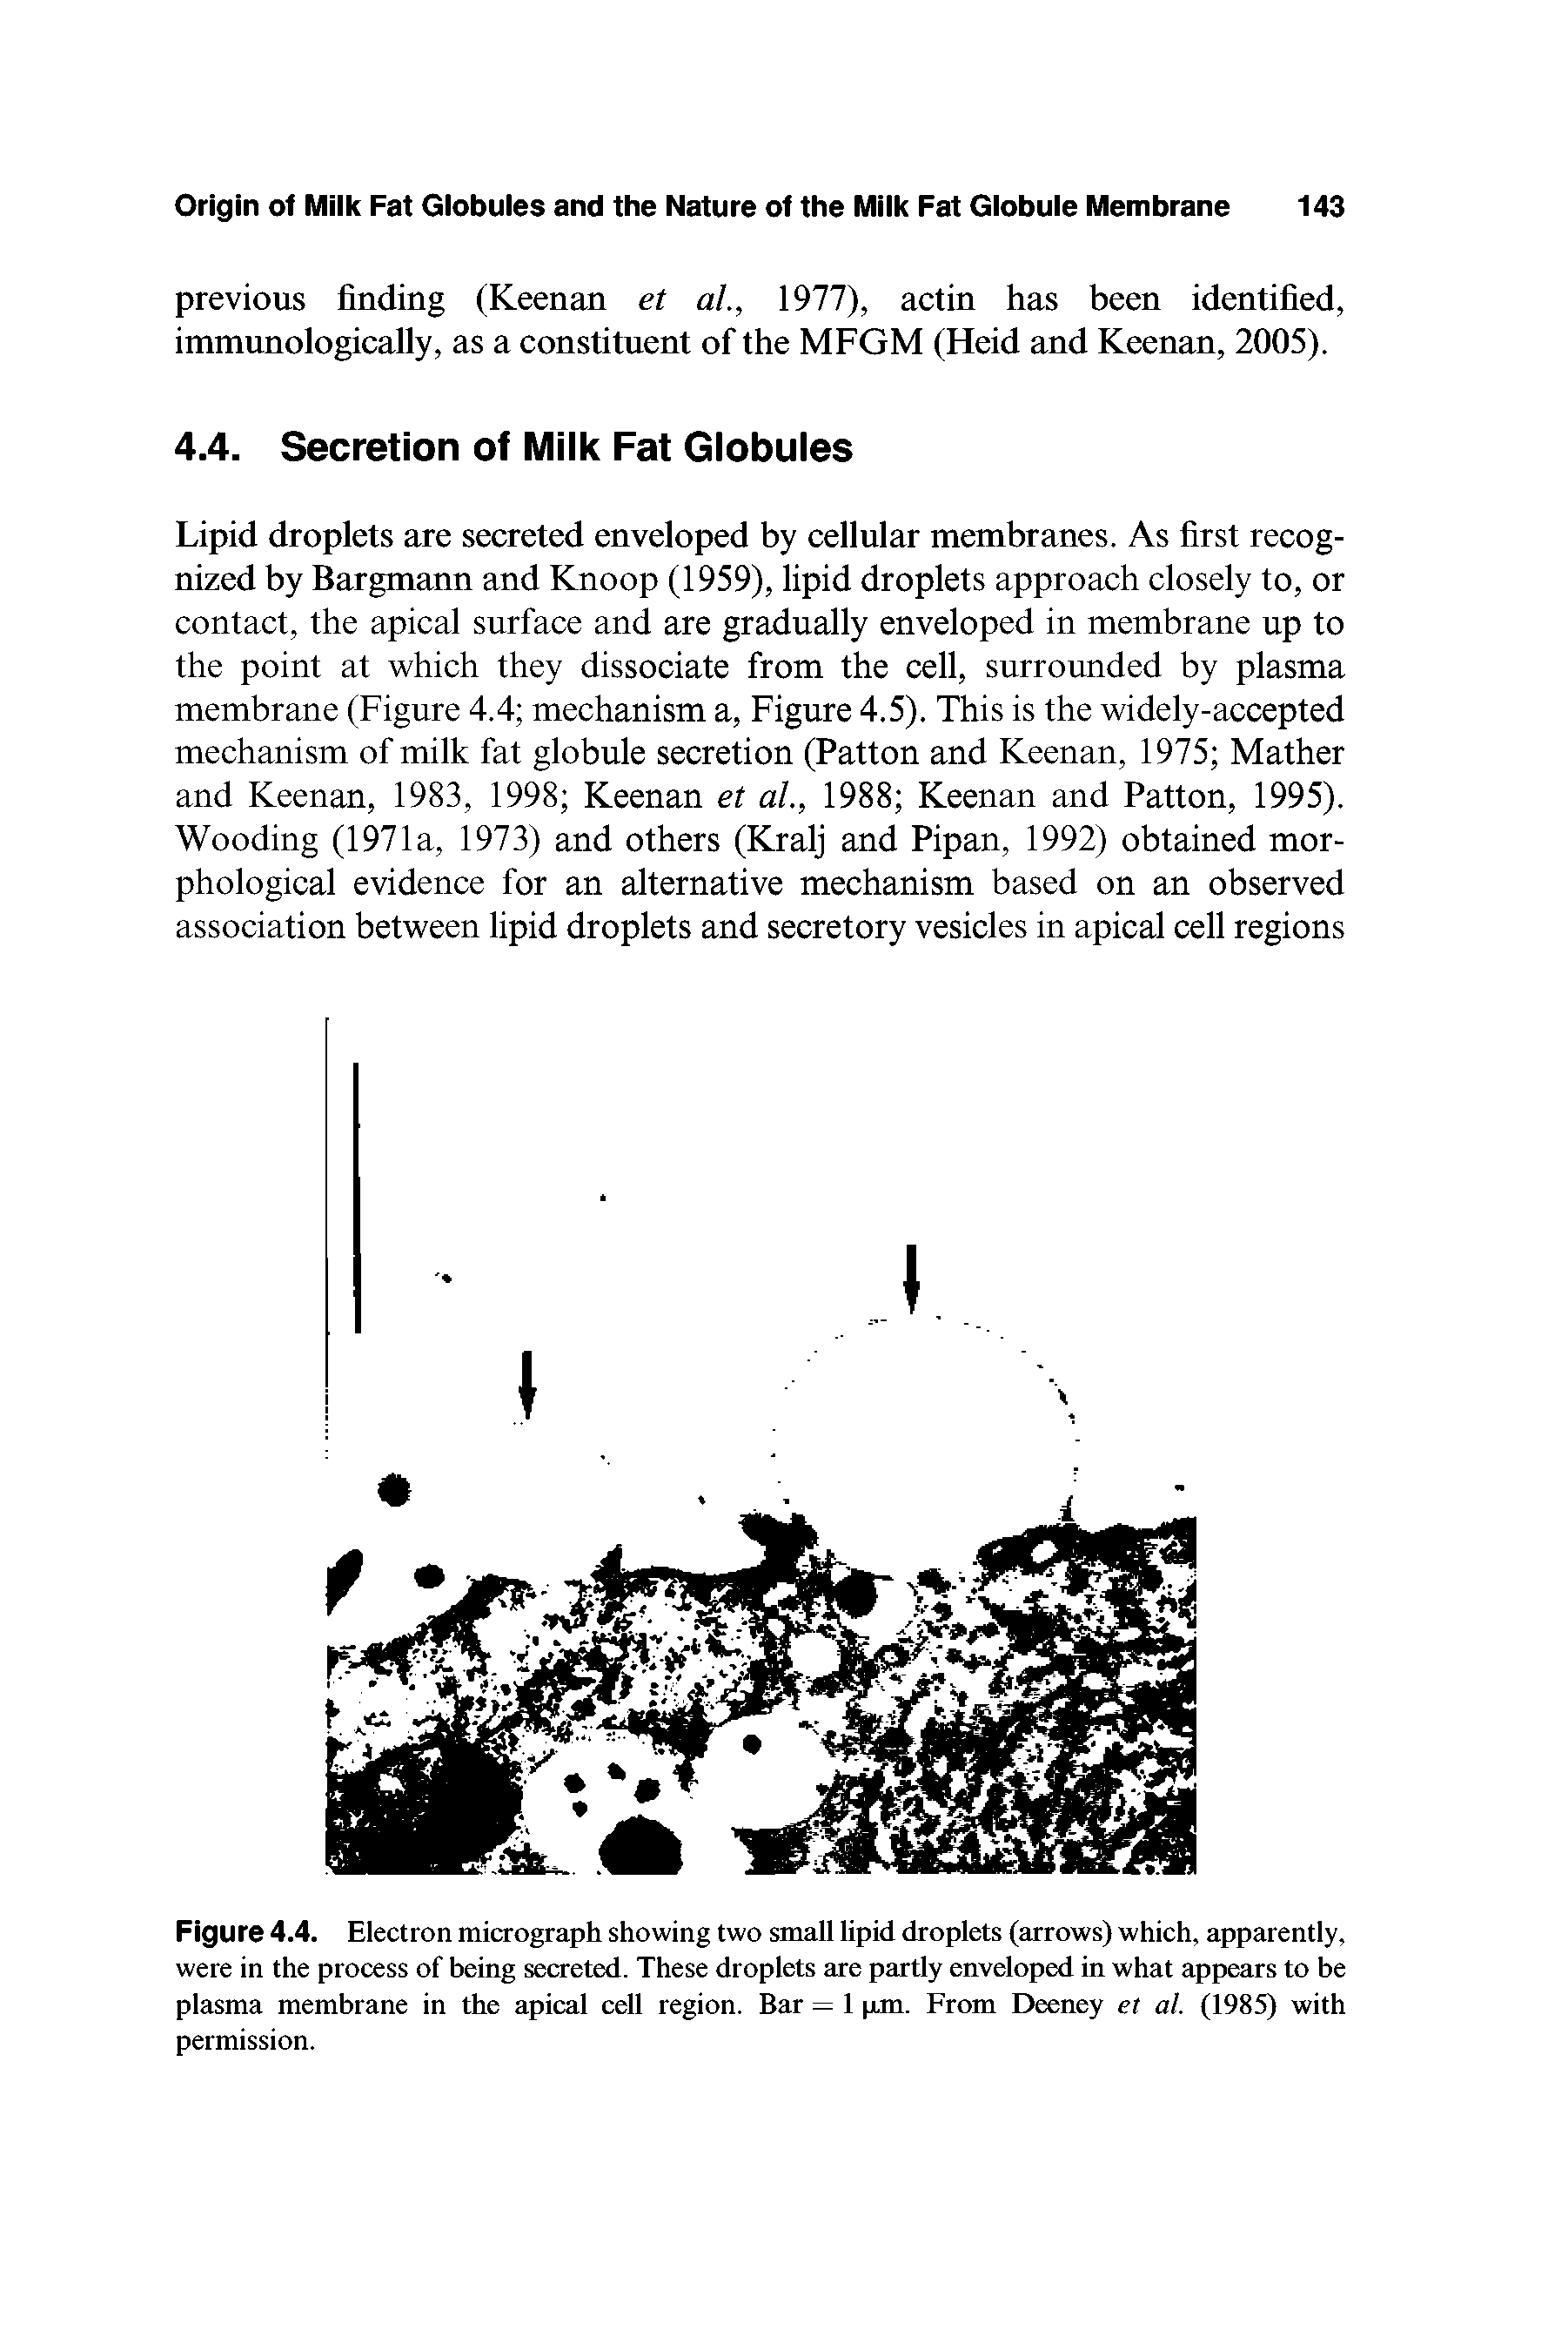 Figure 4.4. Electron micrograph showing two small lipid droplets (arrows) which, apparently, were in the process of being secreted. These droplets are partly enveloped in what appears to be plasma membrane in the apical cell region. Bar = 1 pm. From Deeney et al. (1985) with permission.